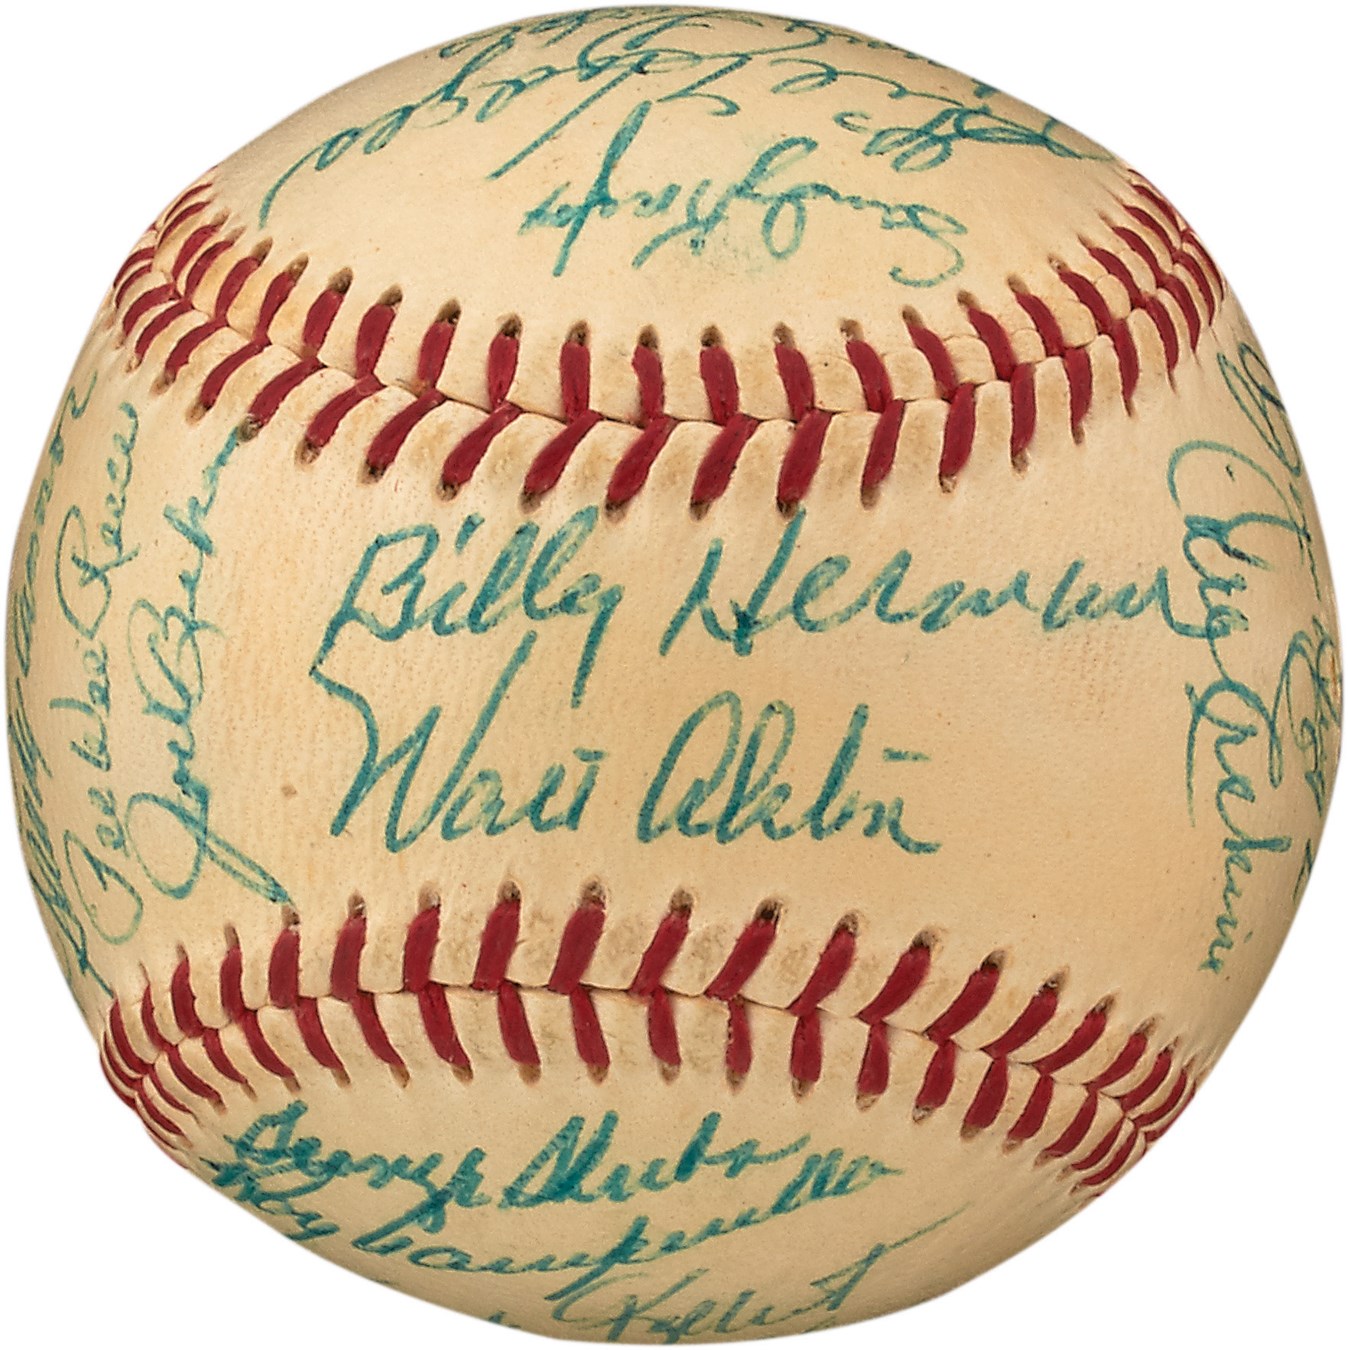 - The Finest 1955 Brooklyn Dodgers Team-Signed Baseball Extant (NO Clubhouse Signatures, PSA NM-MT 8)